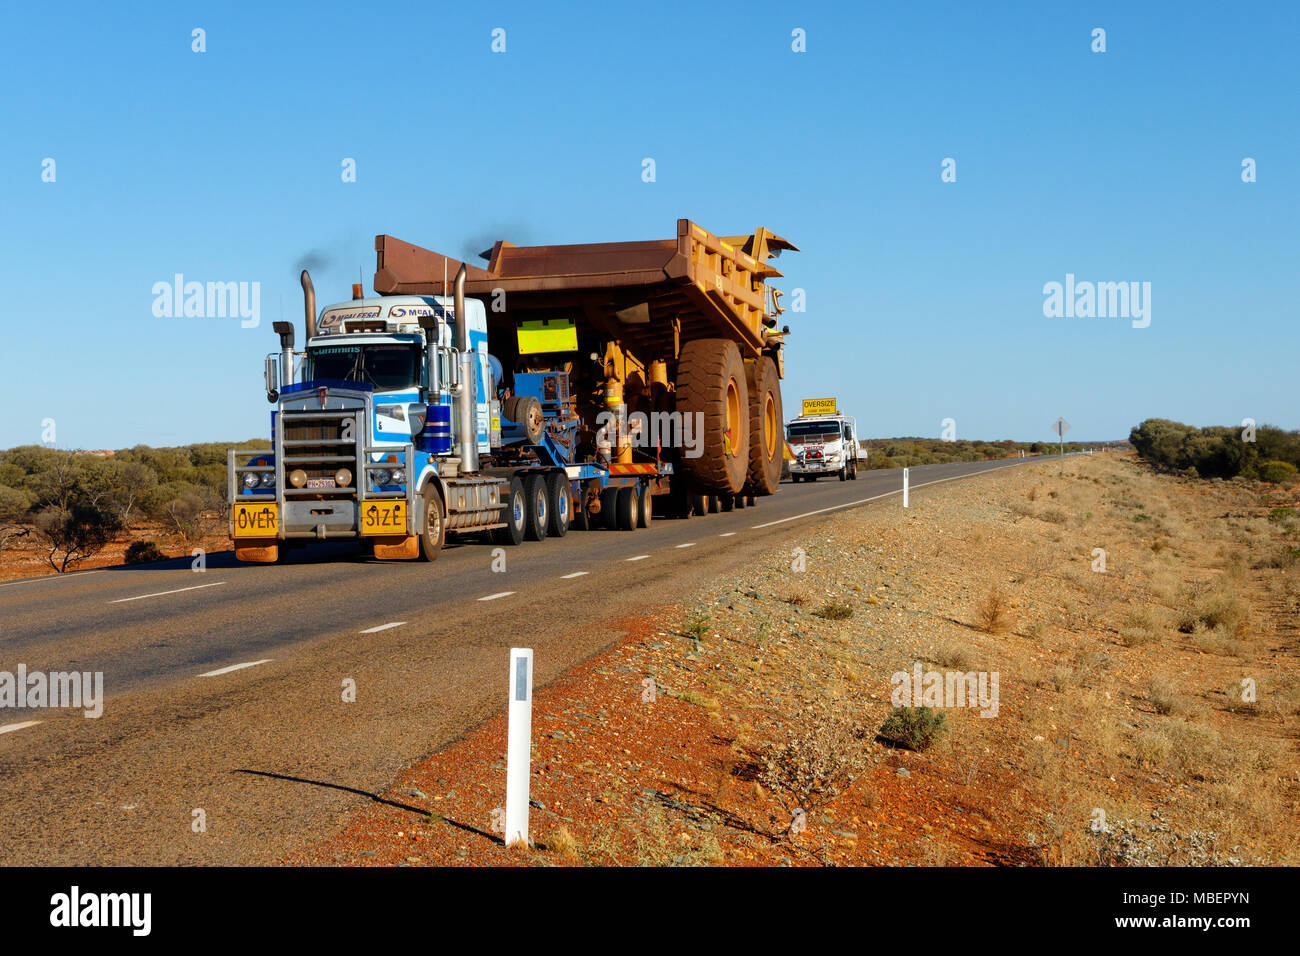 Oversized dump truck being transported on the great northern highway, Northern Goldfields, Western Australia Stock Photo